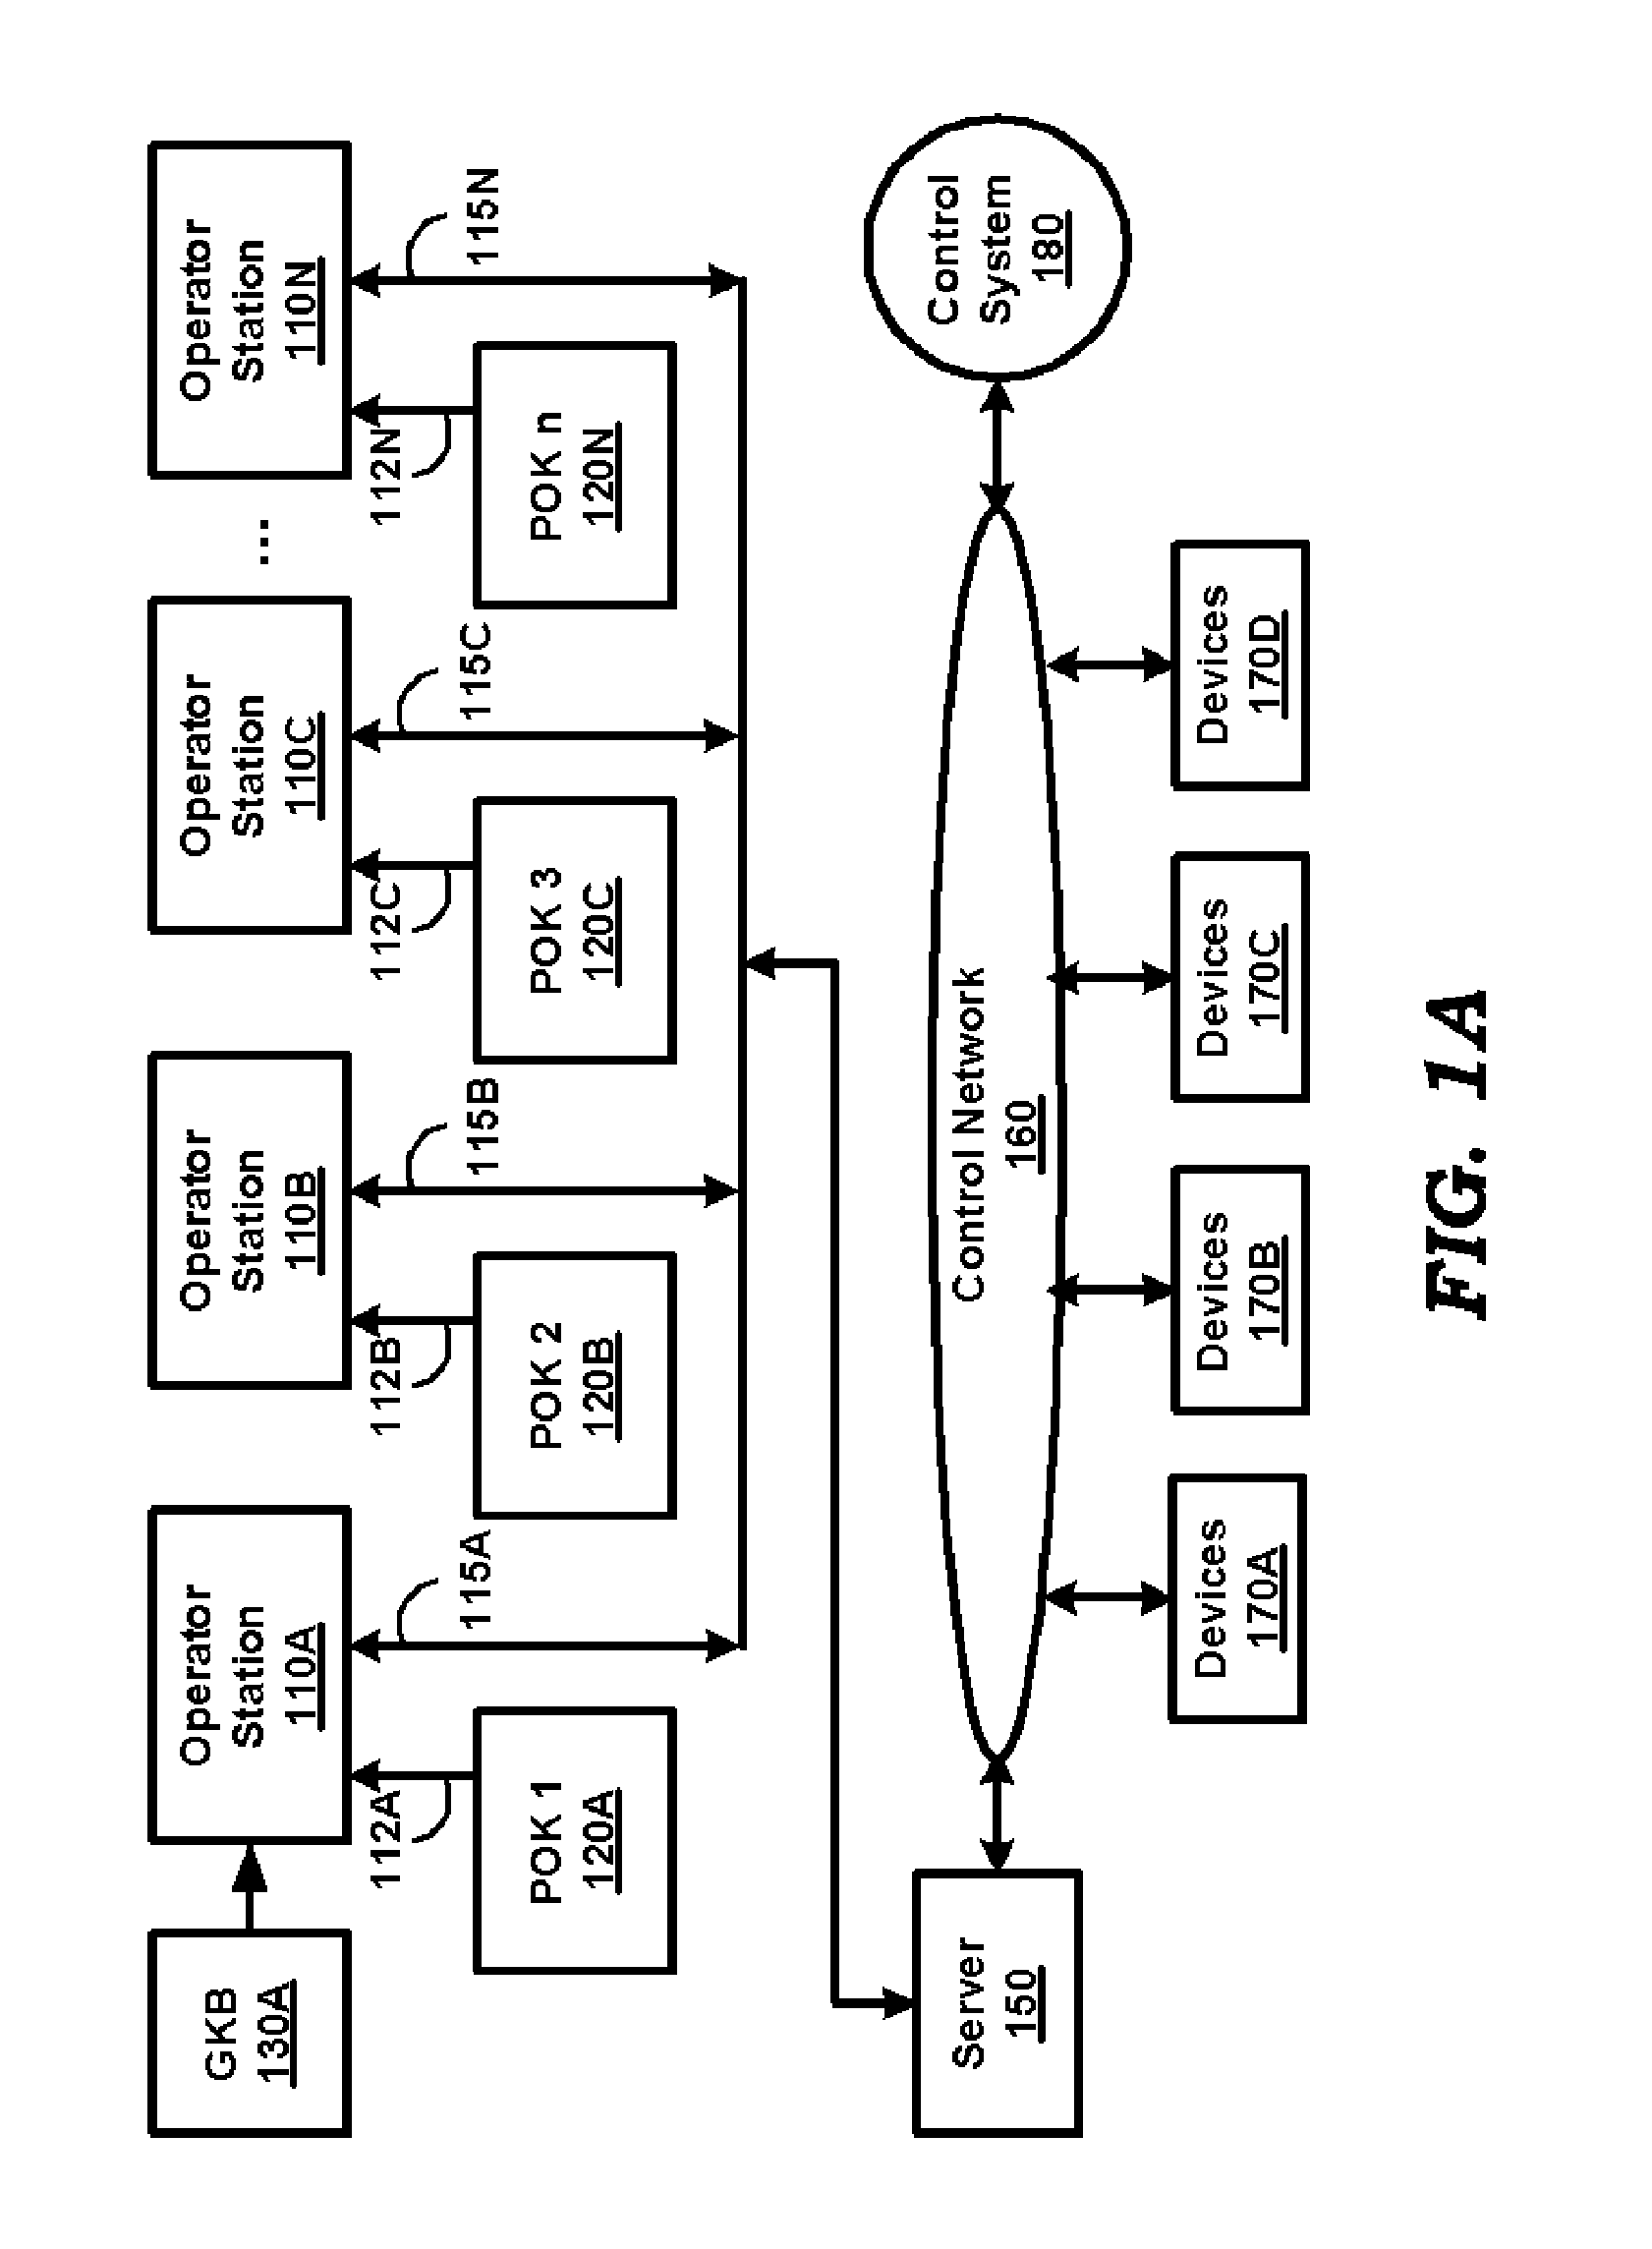 Keyboards having multiple groups of keys in the management of a process control plant